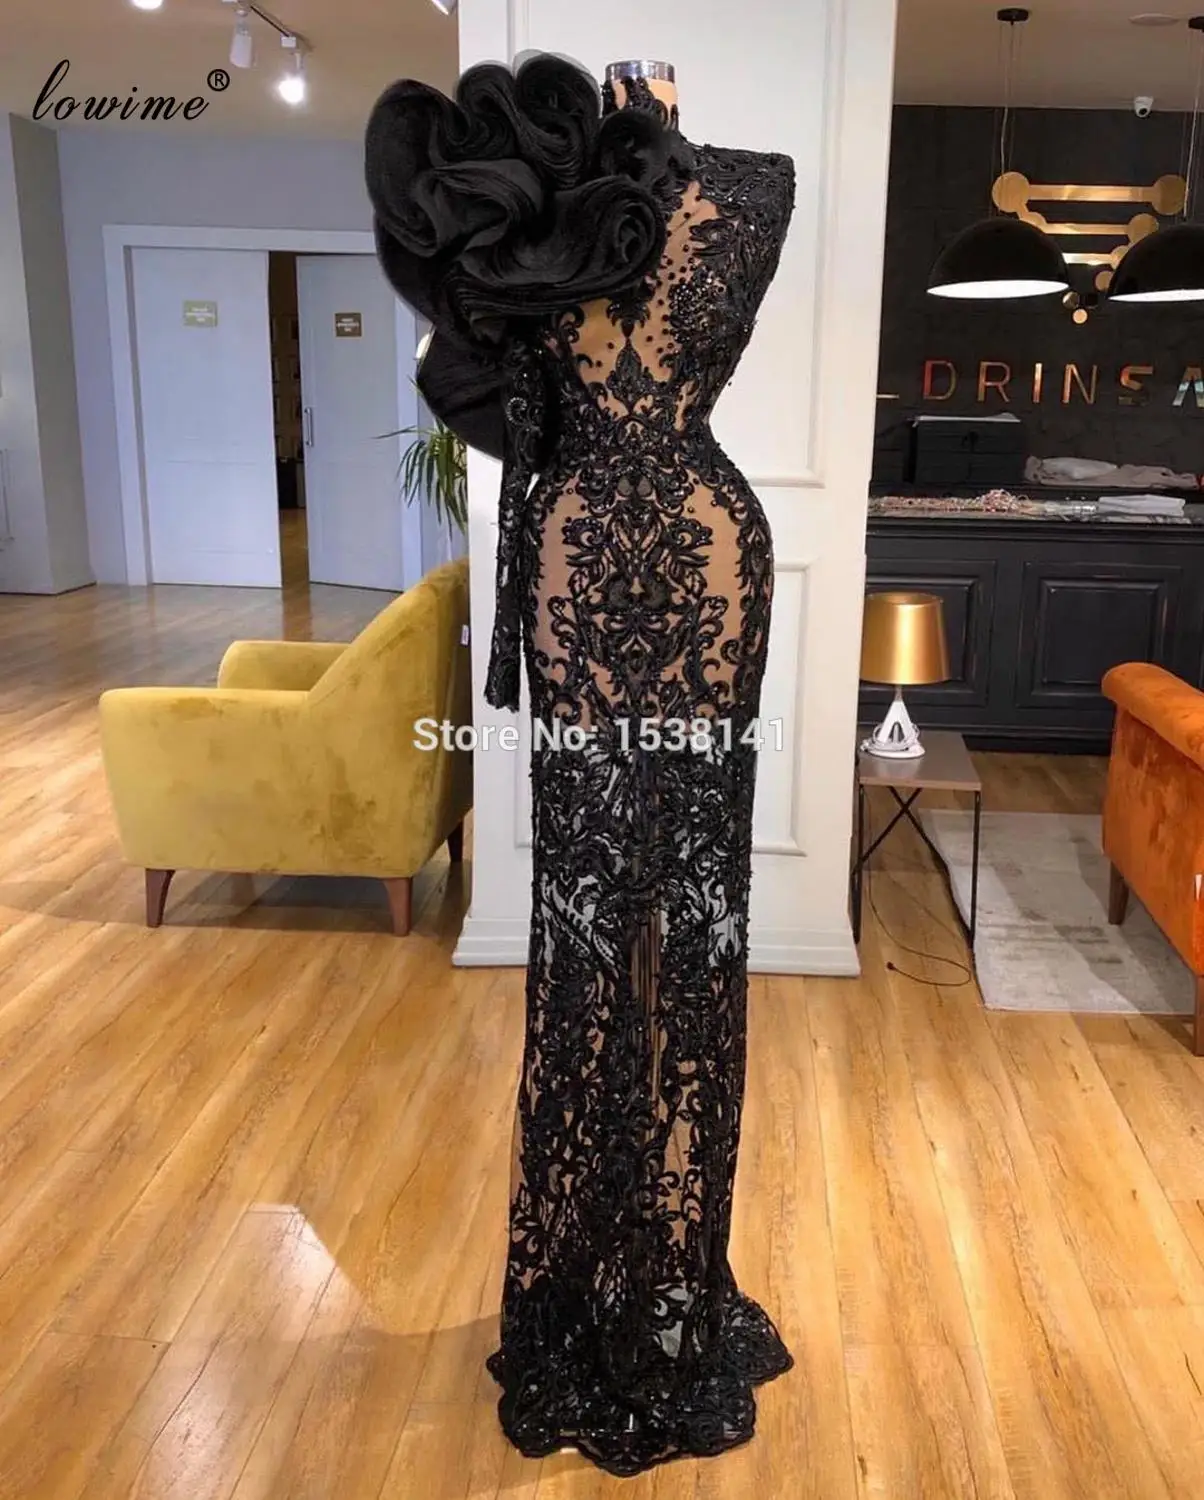 

2020 Black Elegant Lace Evening Dresses Long Illusion Beading Celebrity Dresses For Women Mermaid Sexy Prom Gowns Robe De Soiree